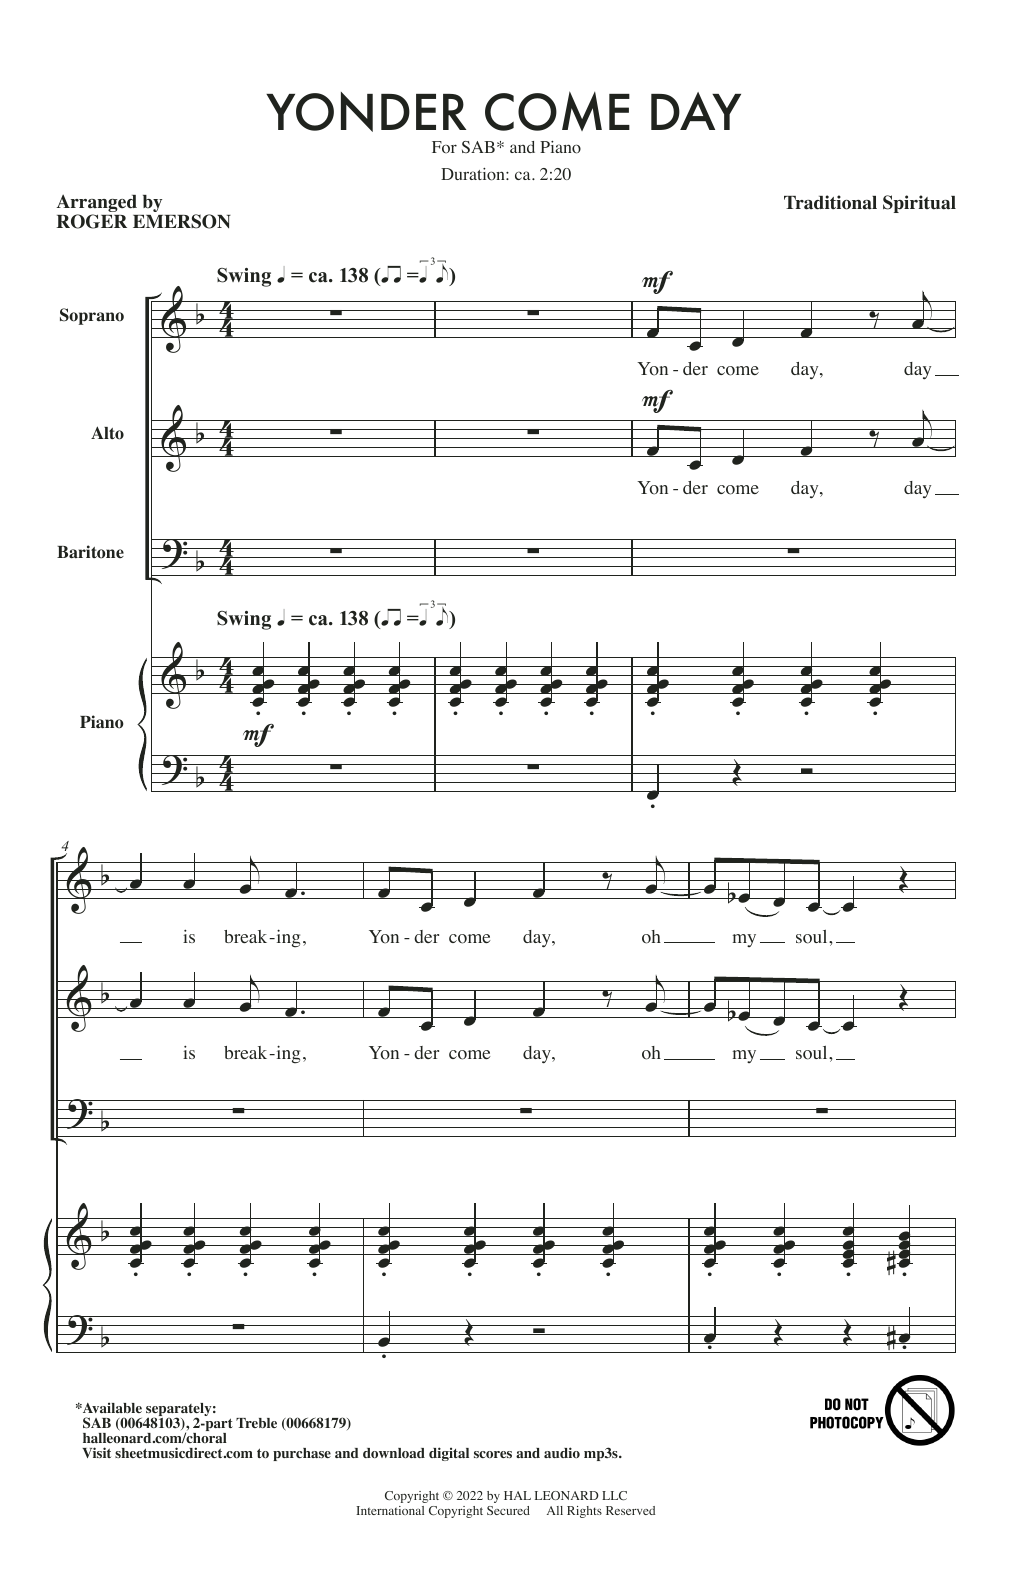 Download Traditional Spiritual Yonder Come Day (arr. Roger Emerson) Sheet Music